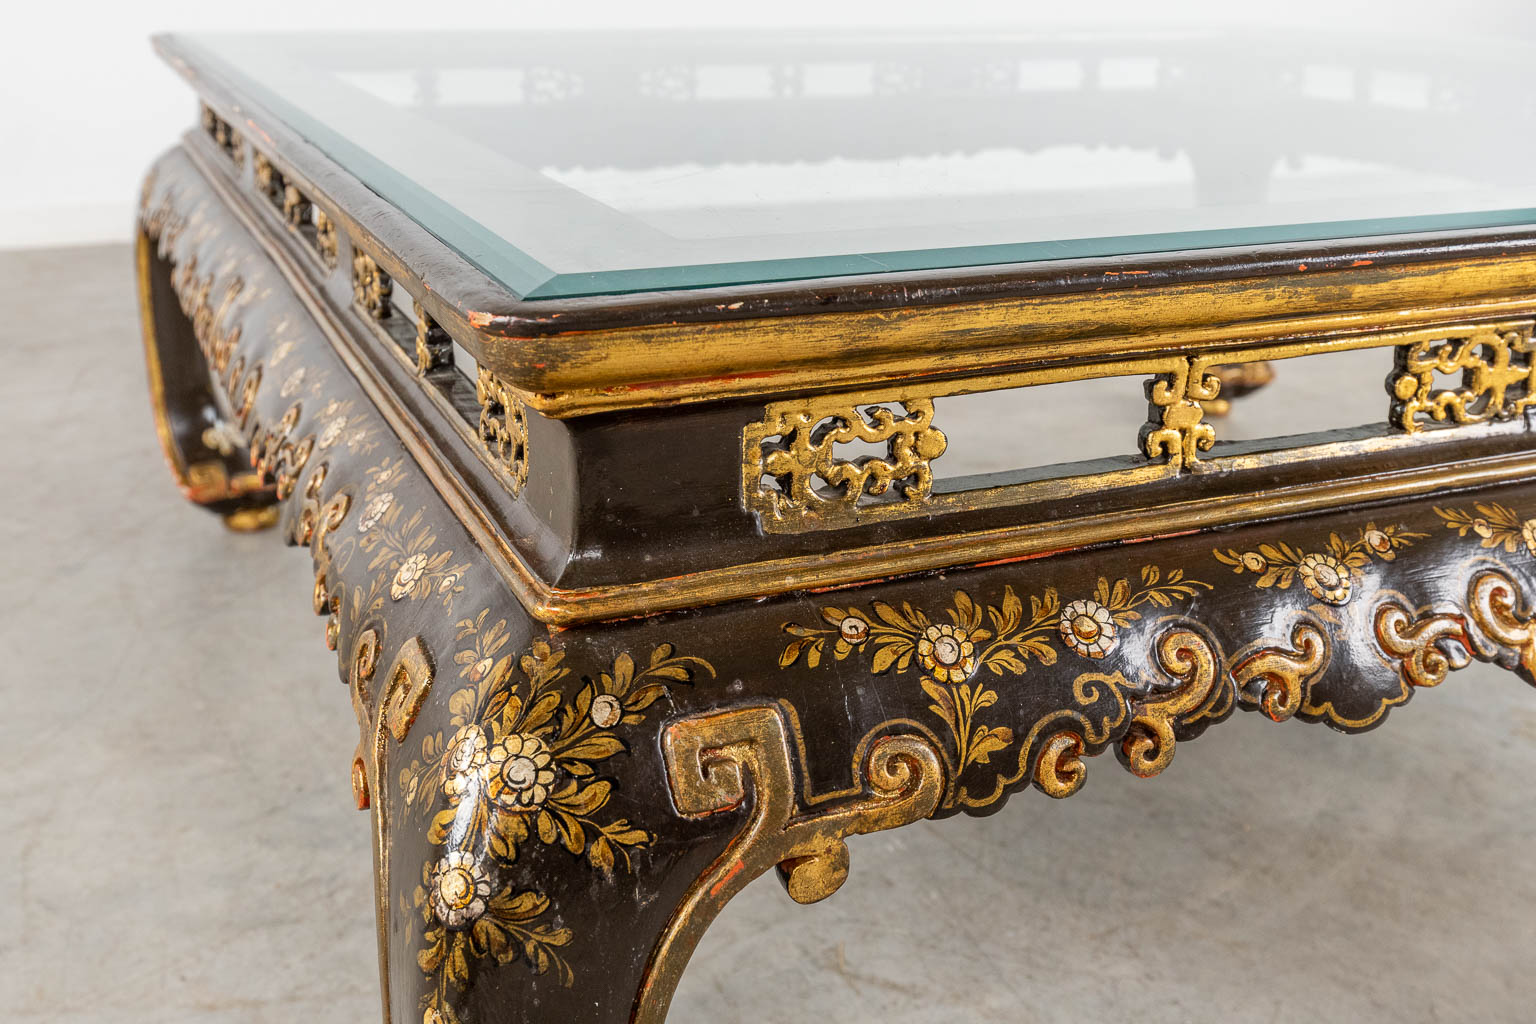 A large Oriental coffee table, wood and glass. 20th C. (D:124 x W:124 x H:46 cm)